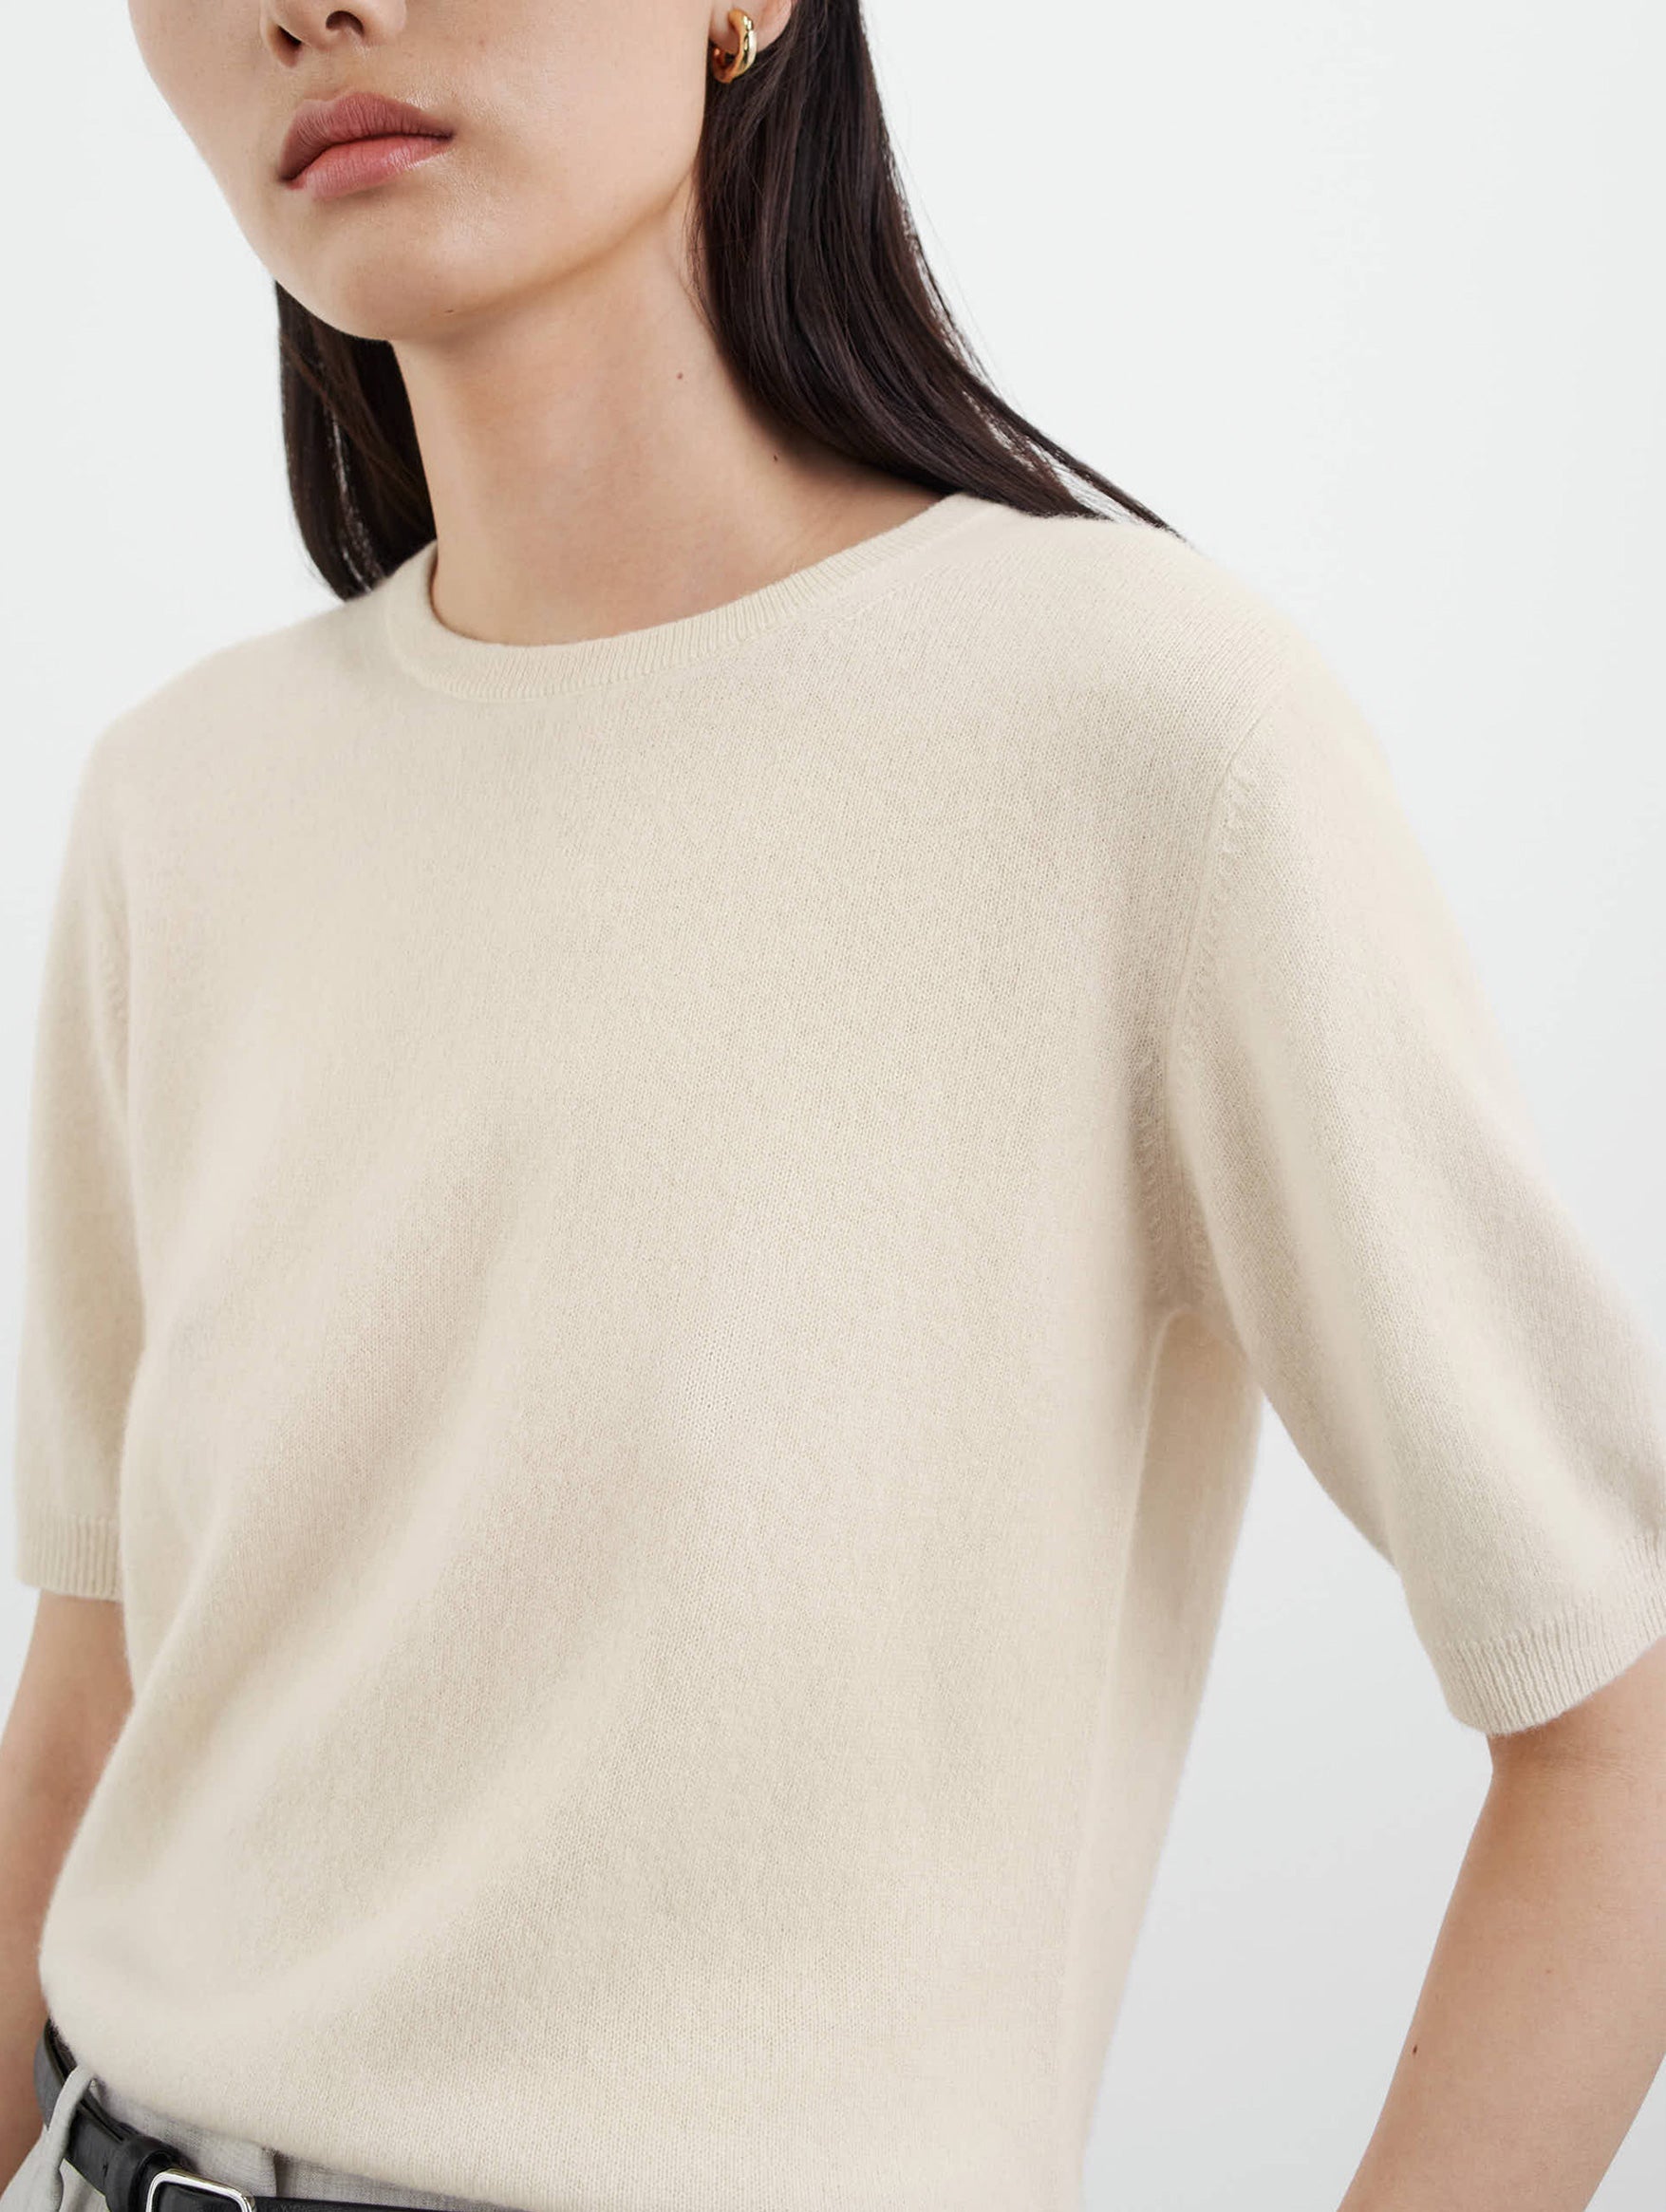 Short Sleeve O-Neck Cashmere Tee in Feather White